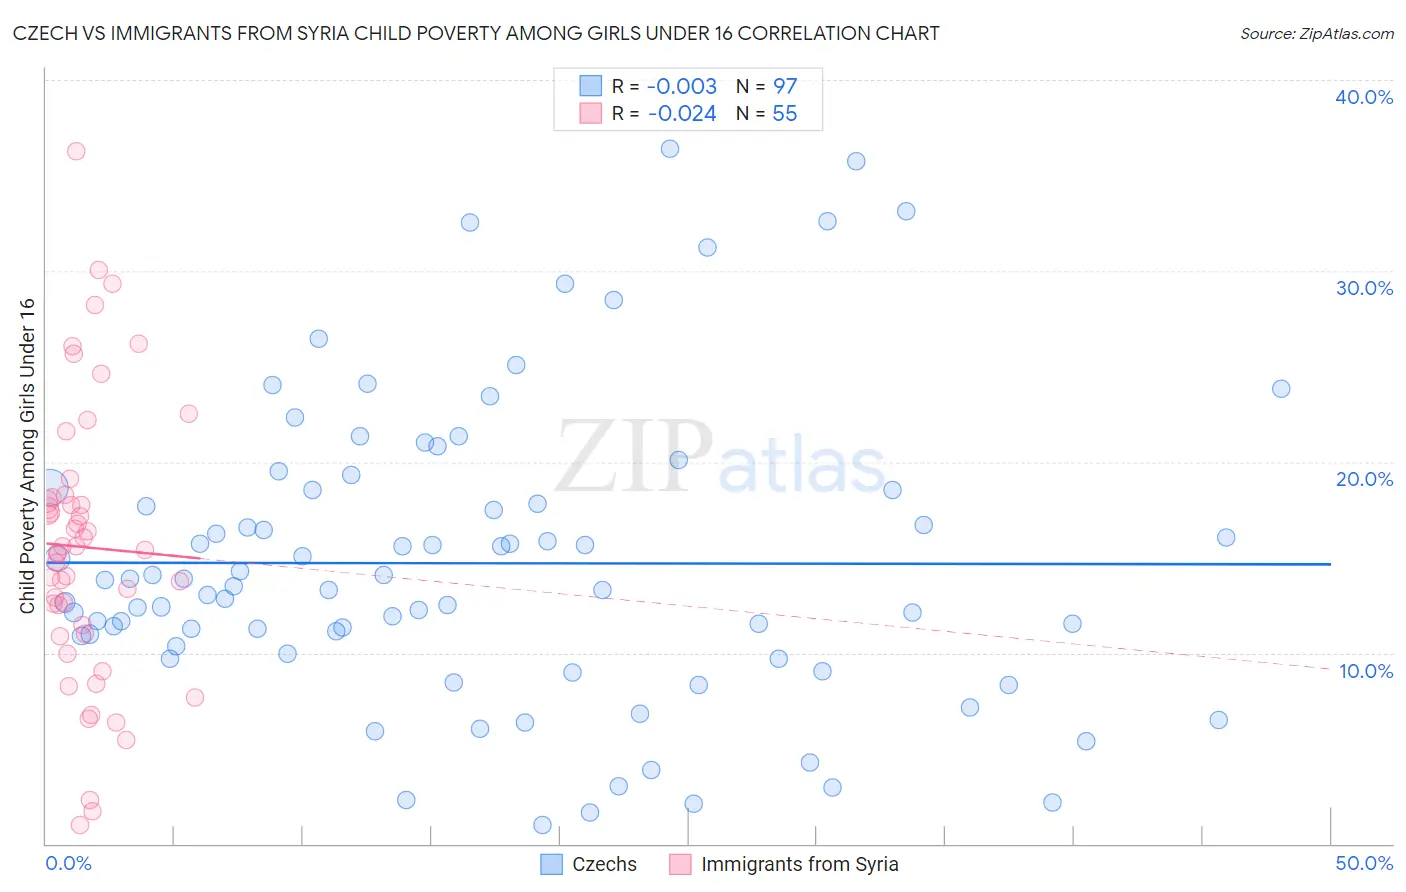 Czech vs Immigrants from Syria Child Poverty Among Girls Under 16